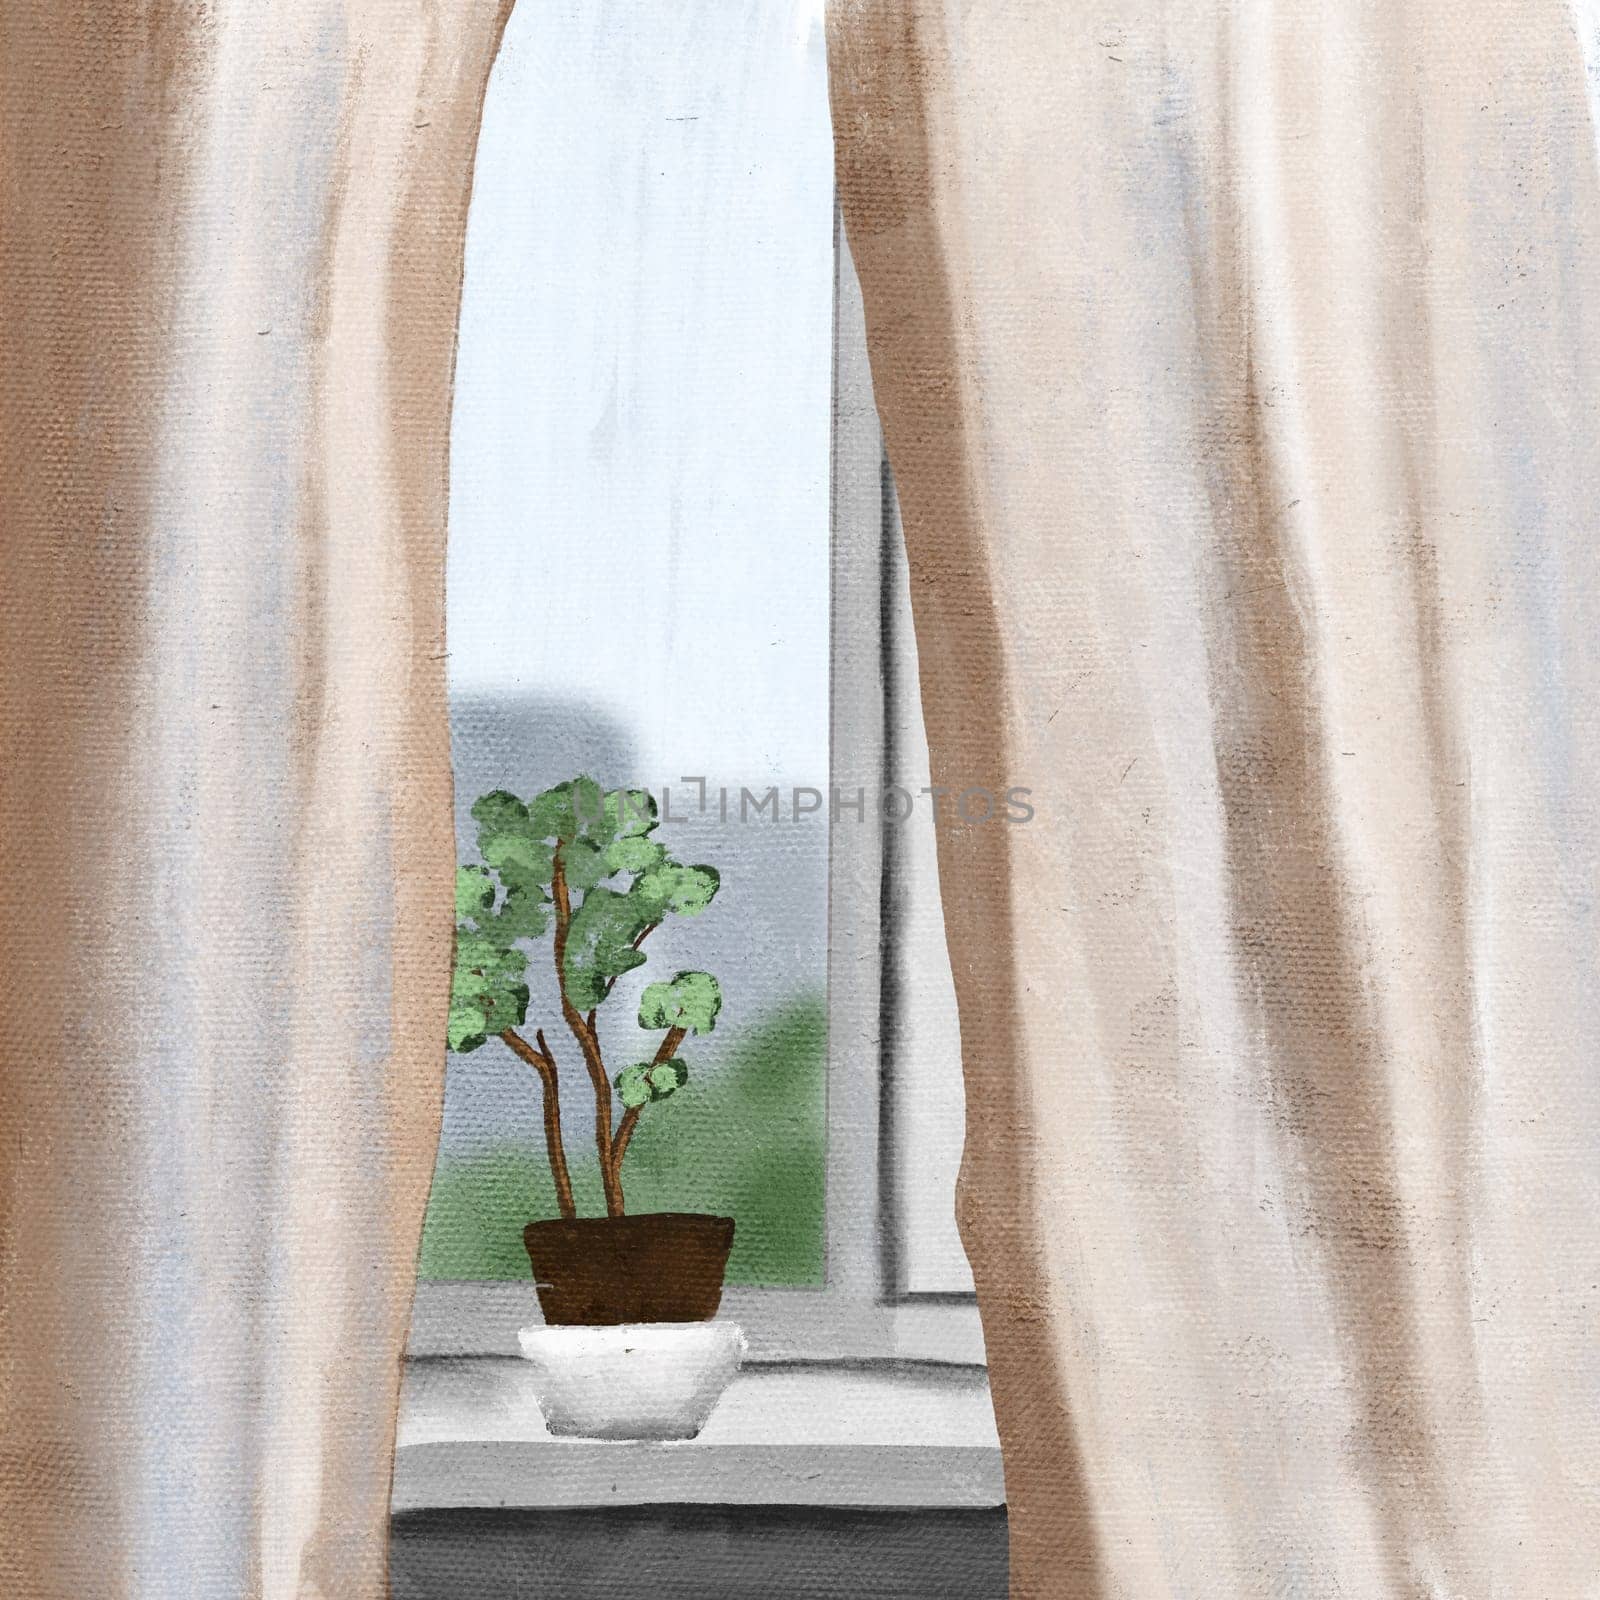 Hand drawn illustration of room window windowsill with houseplant, city town view. Beige curtains indoor interior modern minimalist house, decoration room design green nature building